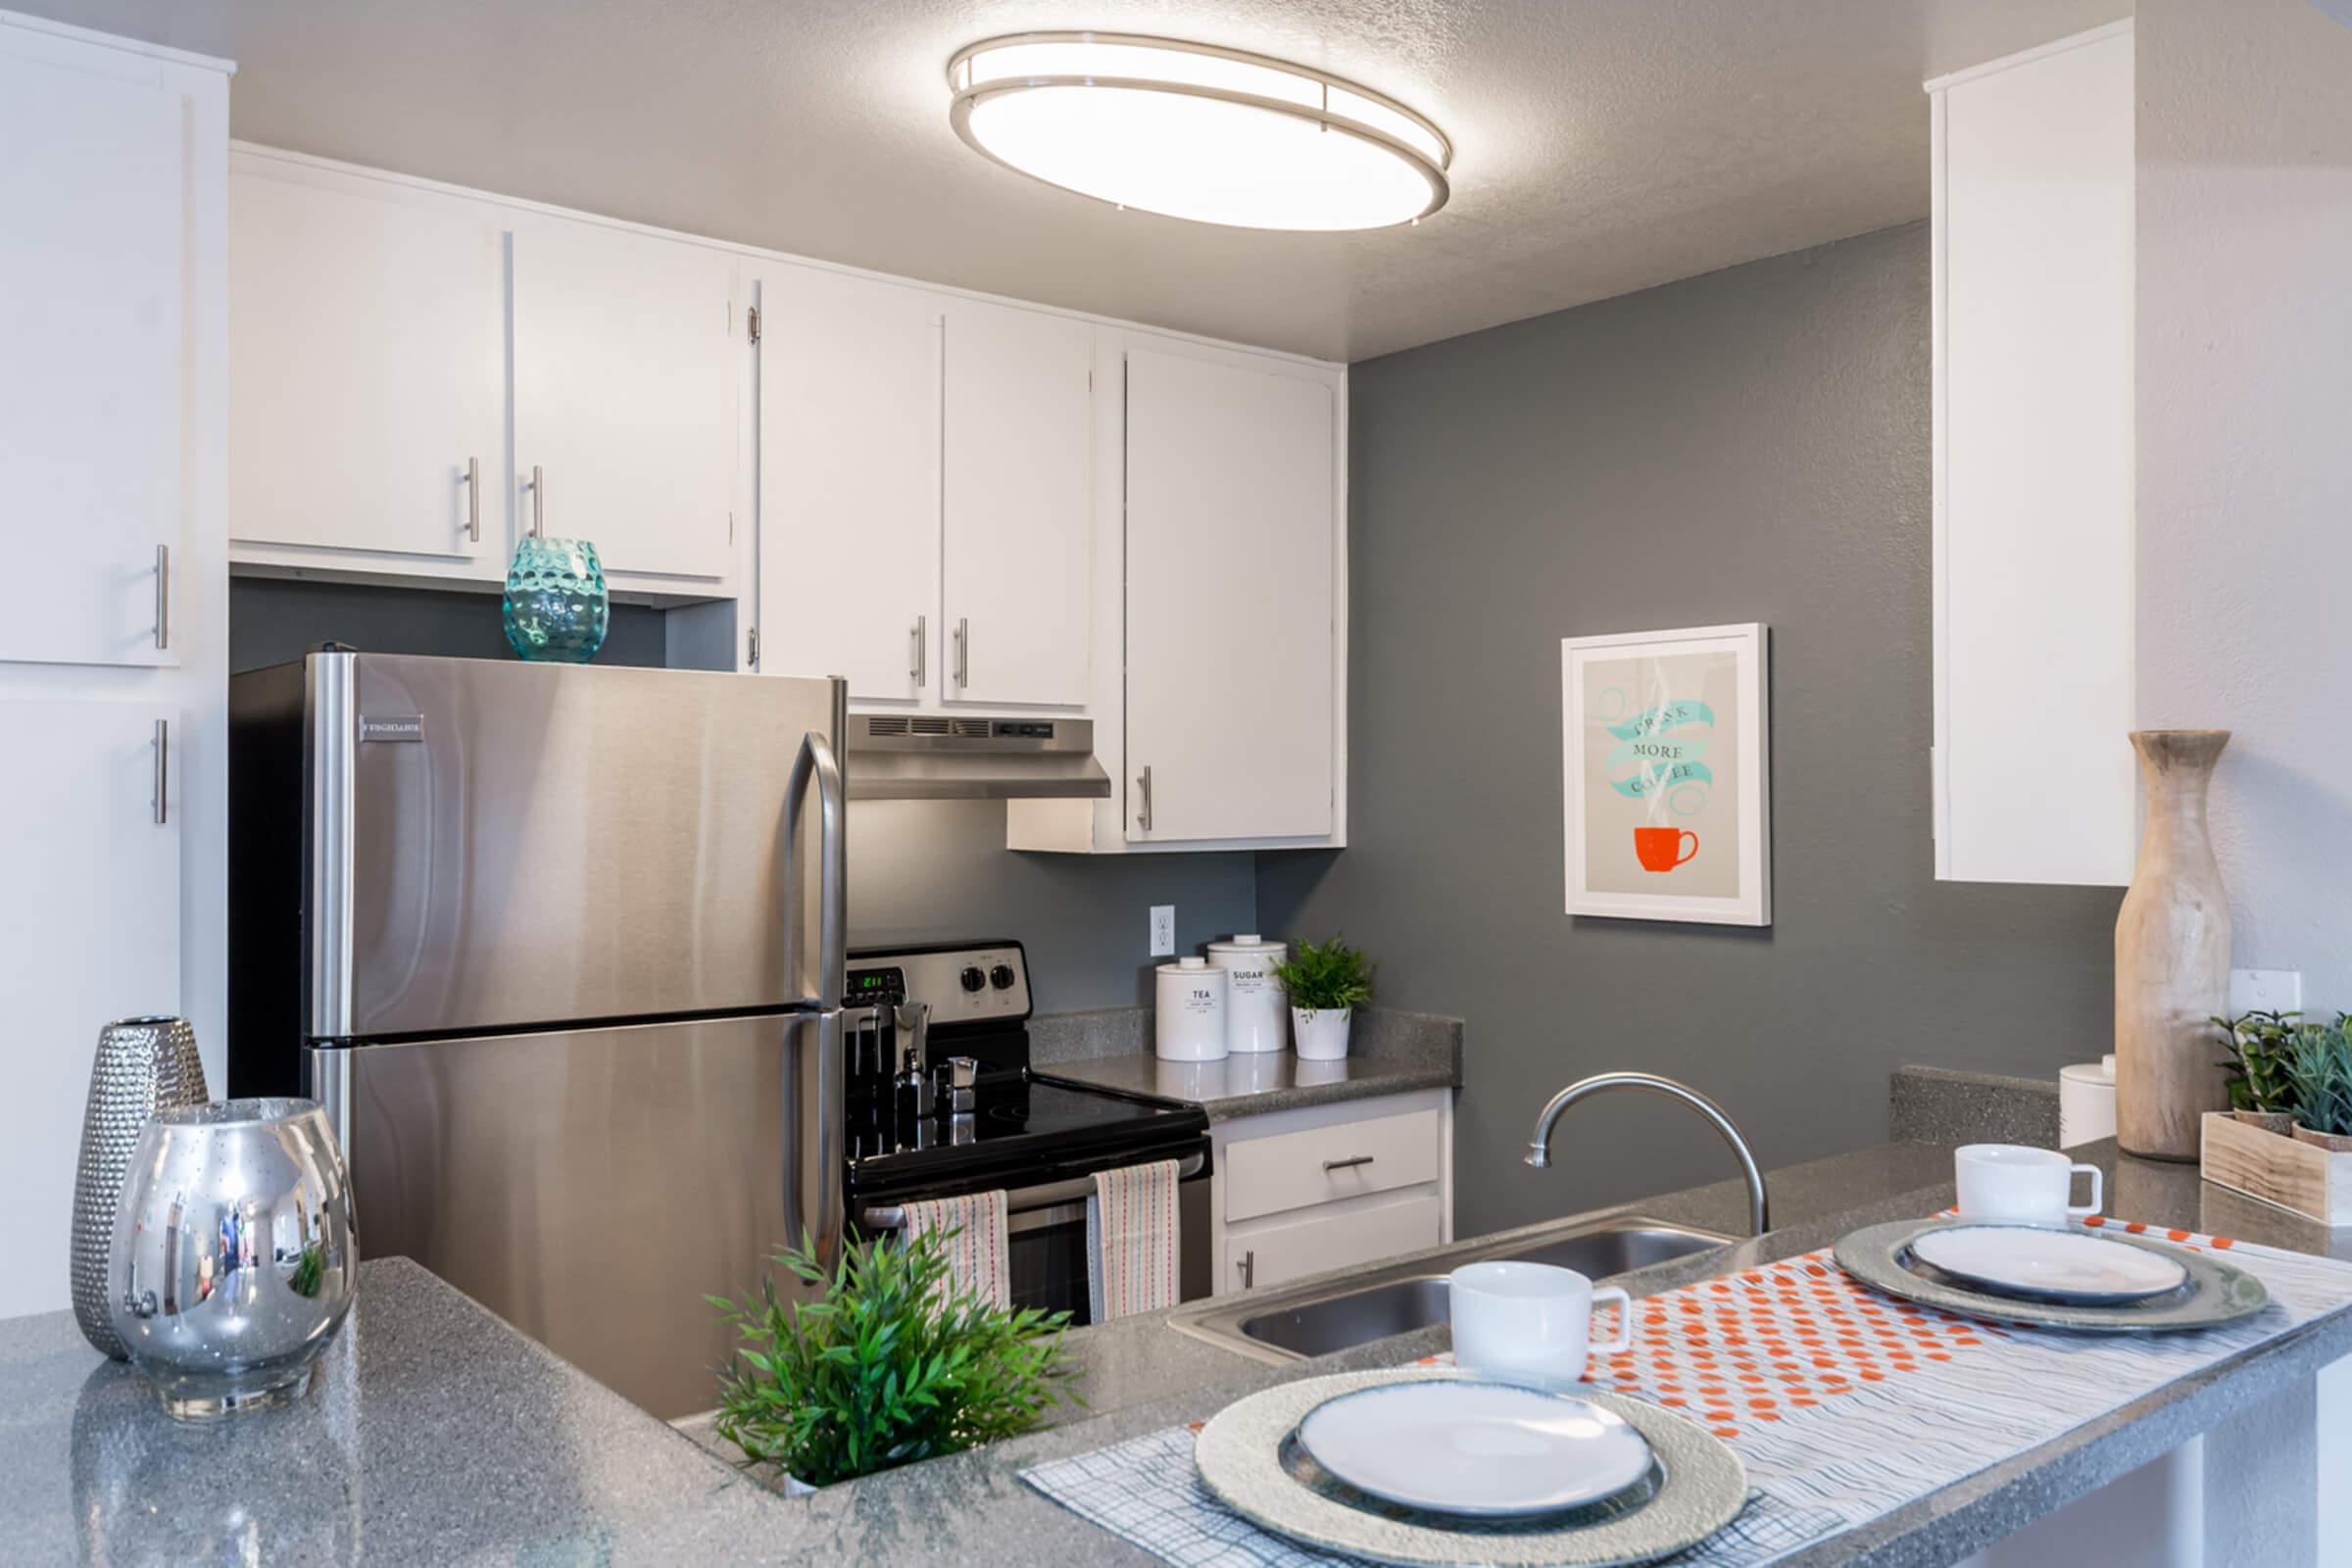 All-Electric kitchen with Stainless Steel Appliances - Eden Apartments - Tempe - Arizona